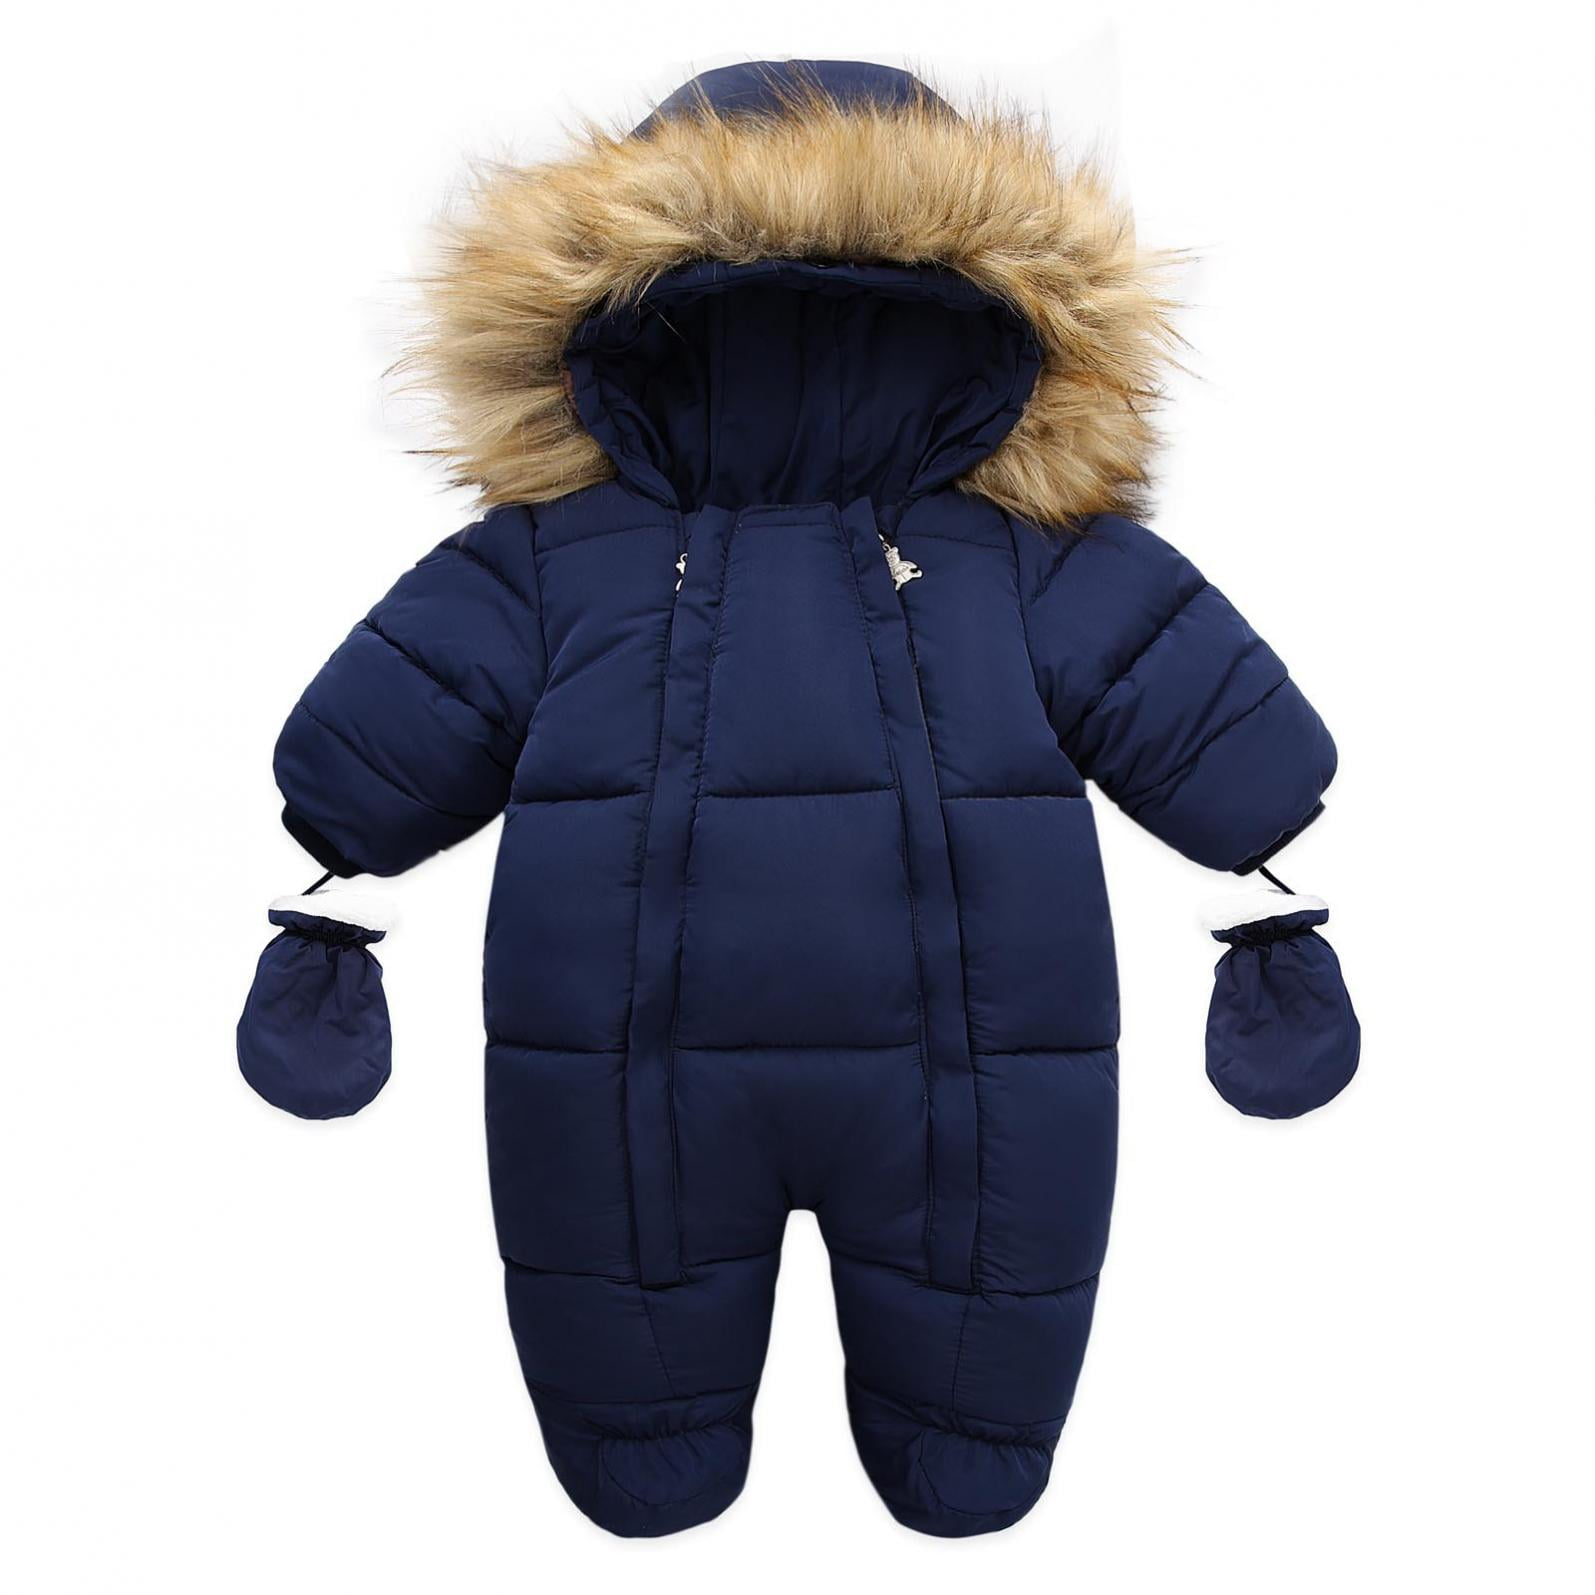 Toddler Baby Boys Girls Winter Snowsuit Rompers Hooded Jacket Jumpsuit Outfits 